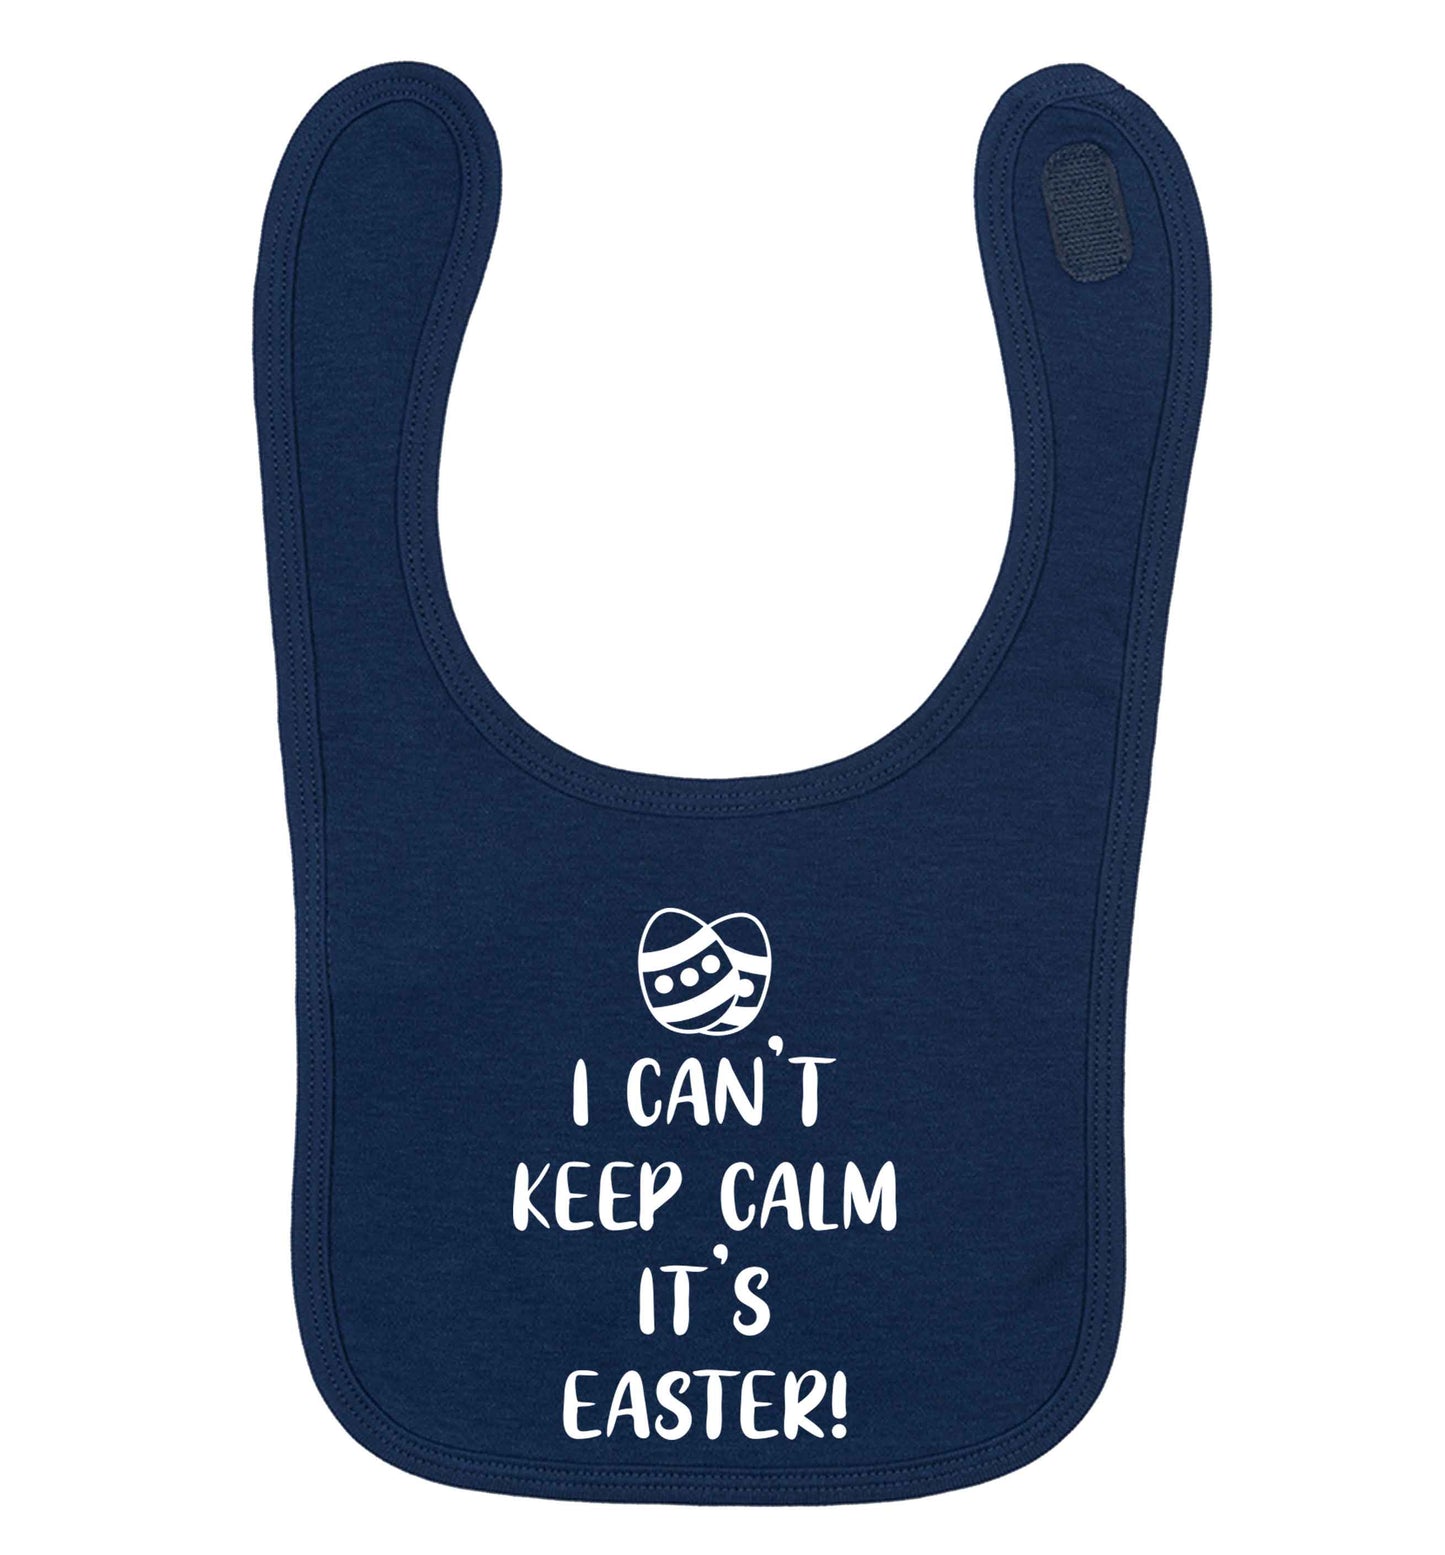 I can't keep calm it's Easter navy baby bib